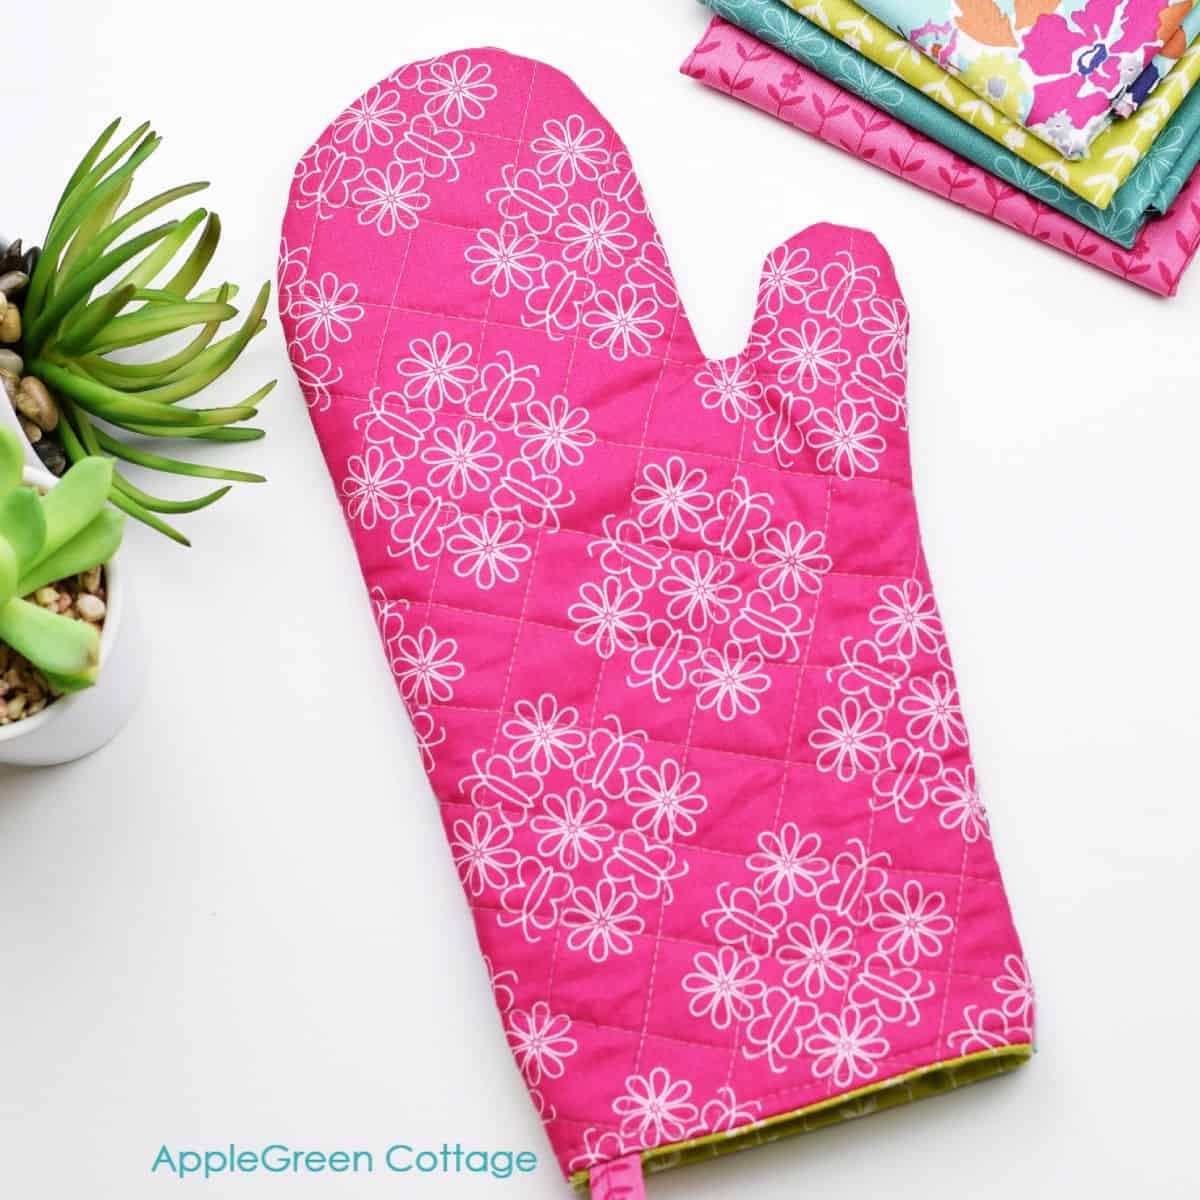 a finished pink quilted oven mitt with floral print on a table next to green flowers